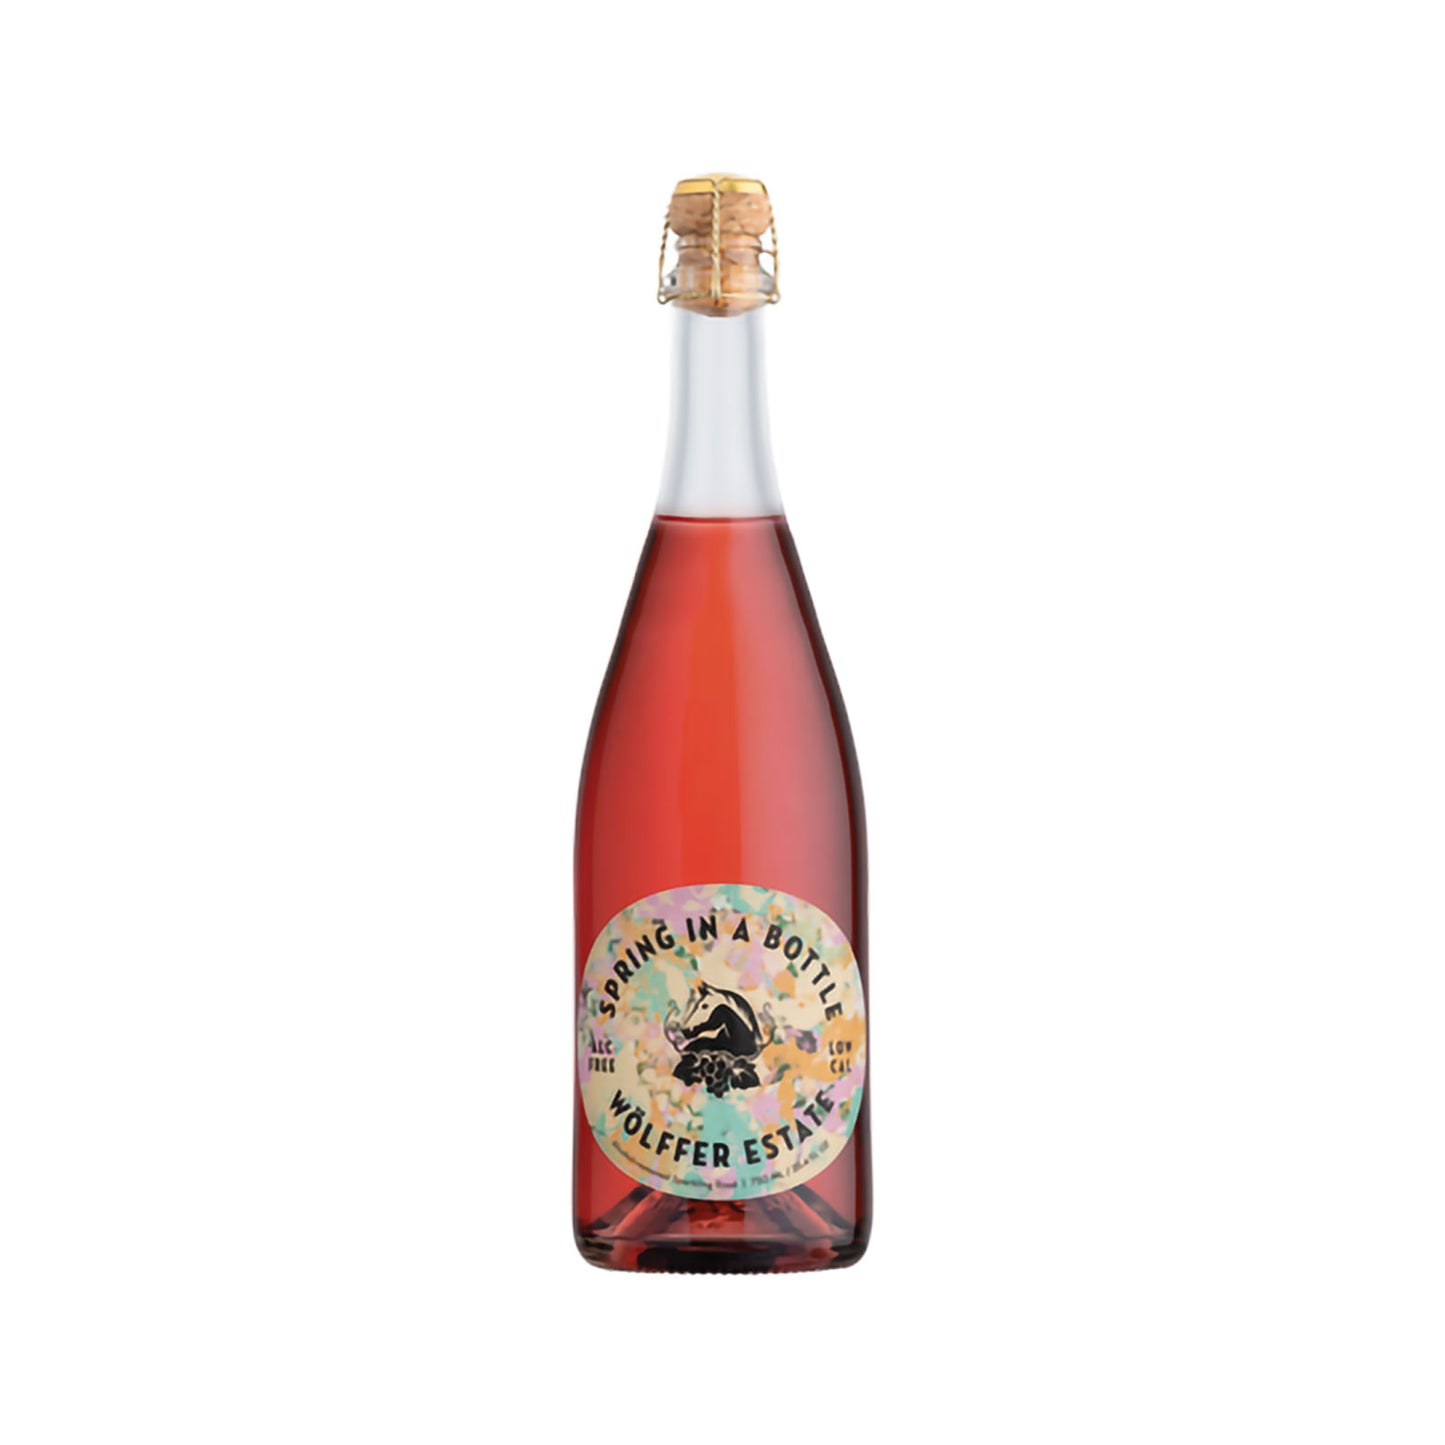 Wölffer Estate Spring in a Bottle Sparkling Non-Alcoholic Wine (Pick Up Only)